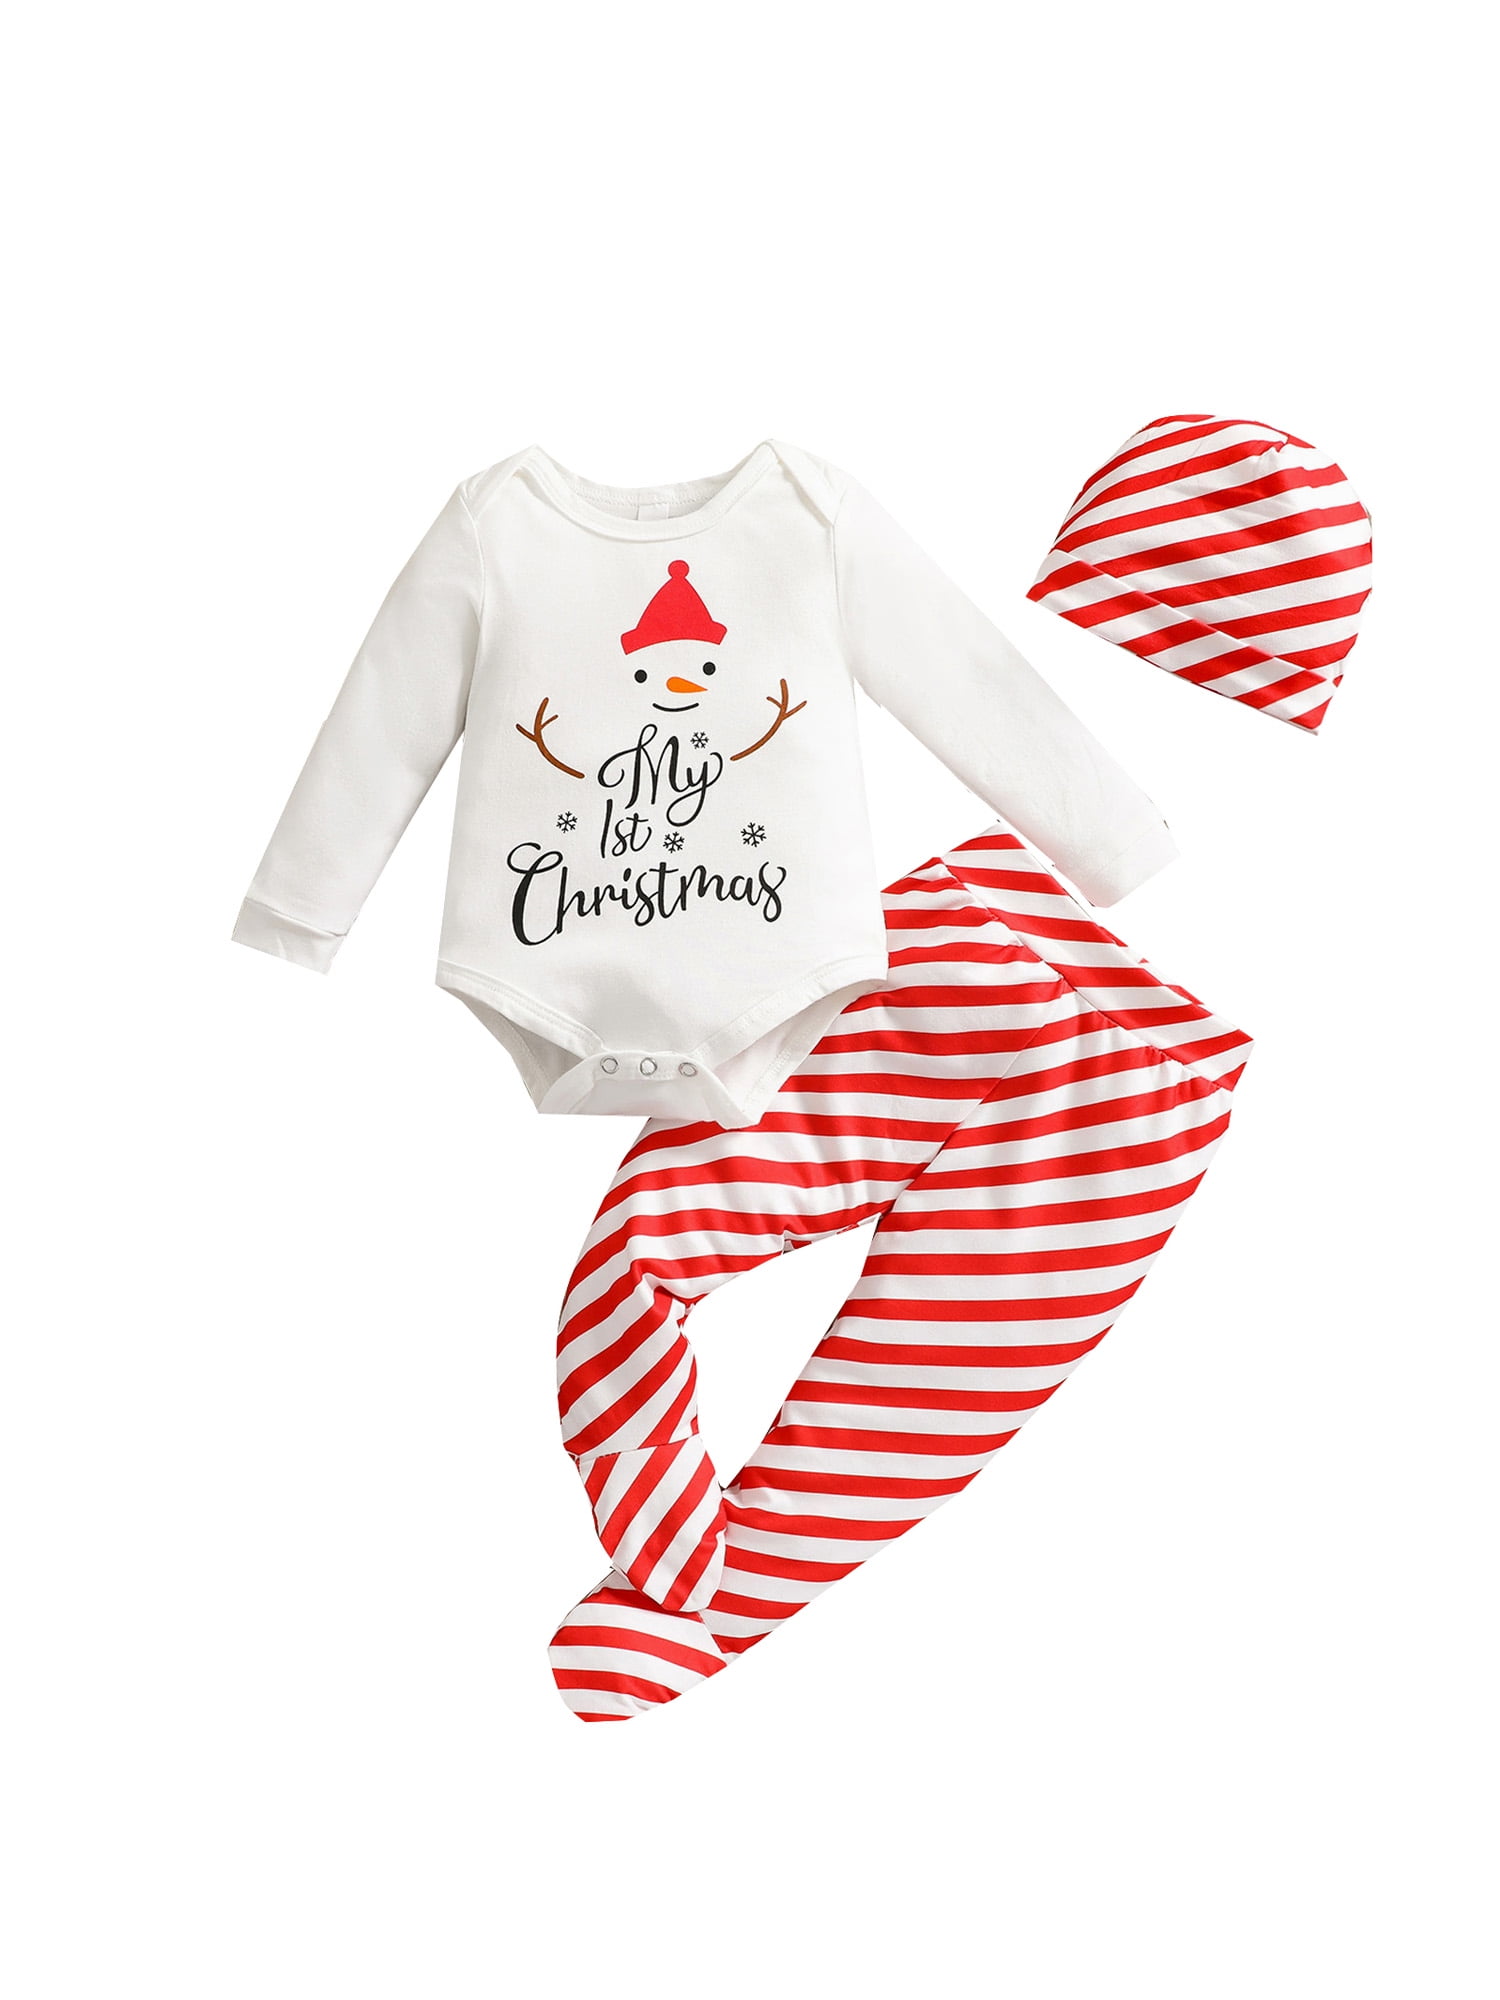 New Christmas Newborn Baby Girls Boys Rompers Jumpsuit Set Outfit Clothes Letter 